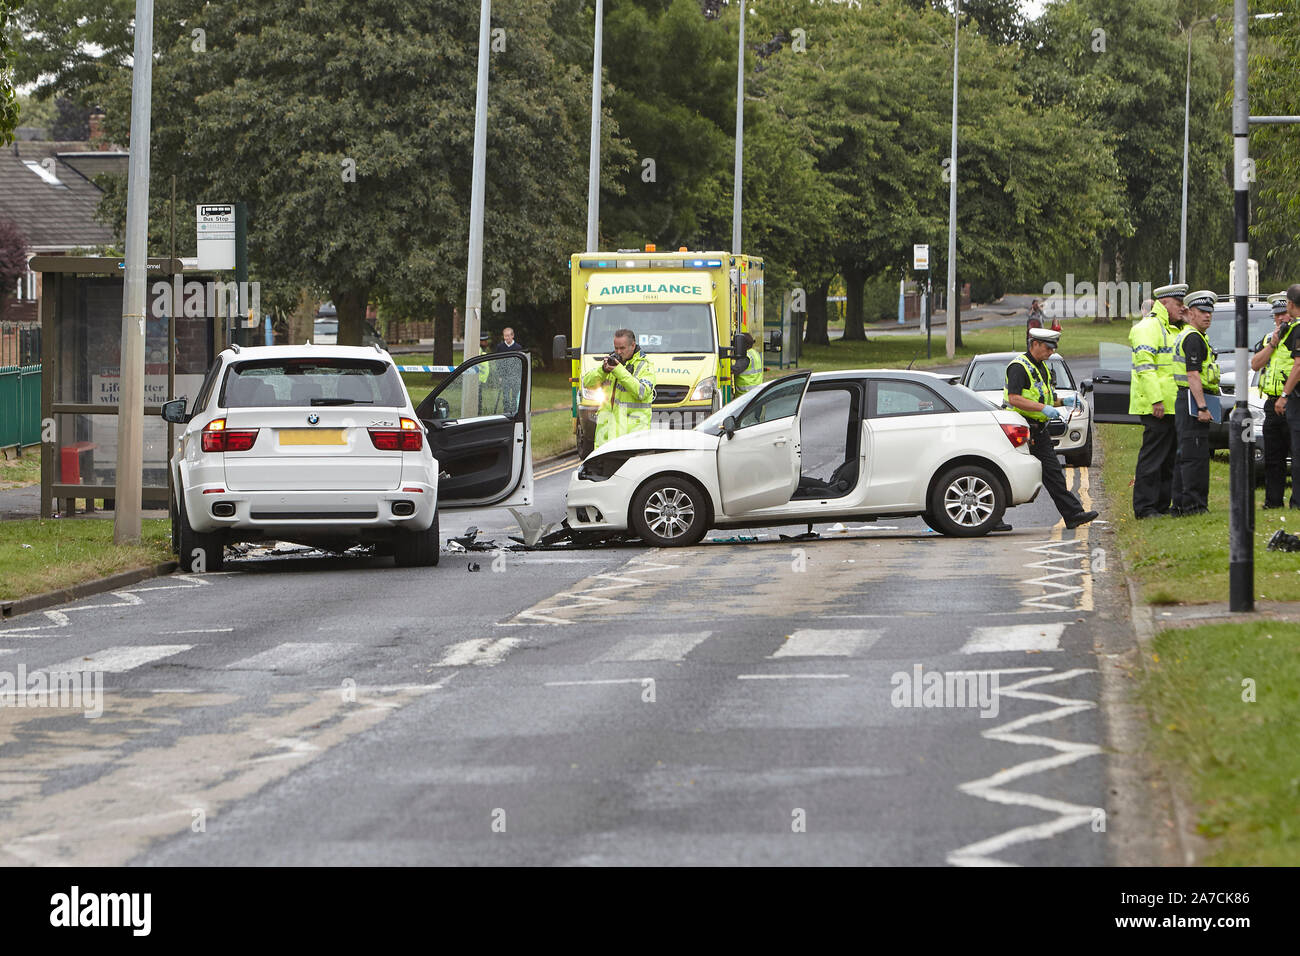 28th July 2016 - Emergency services attend a serious road traffic accident, RTA, following an head on car crash in West Hul, East Yorkshire, UK. Stock Photo